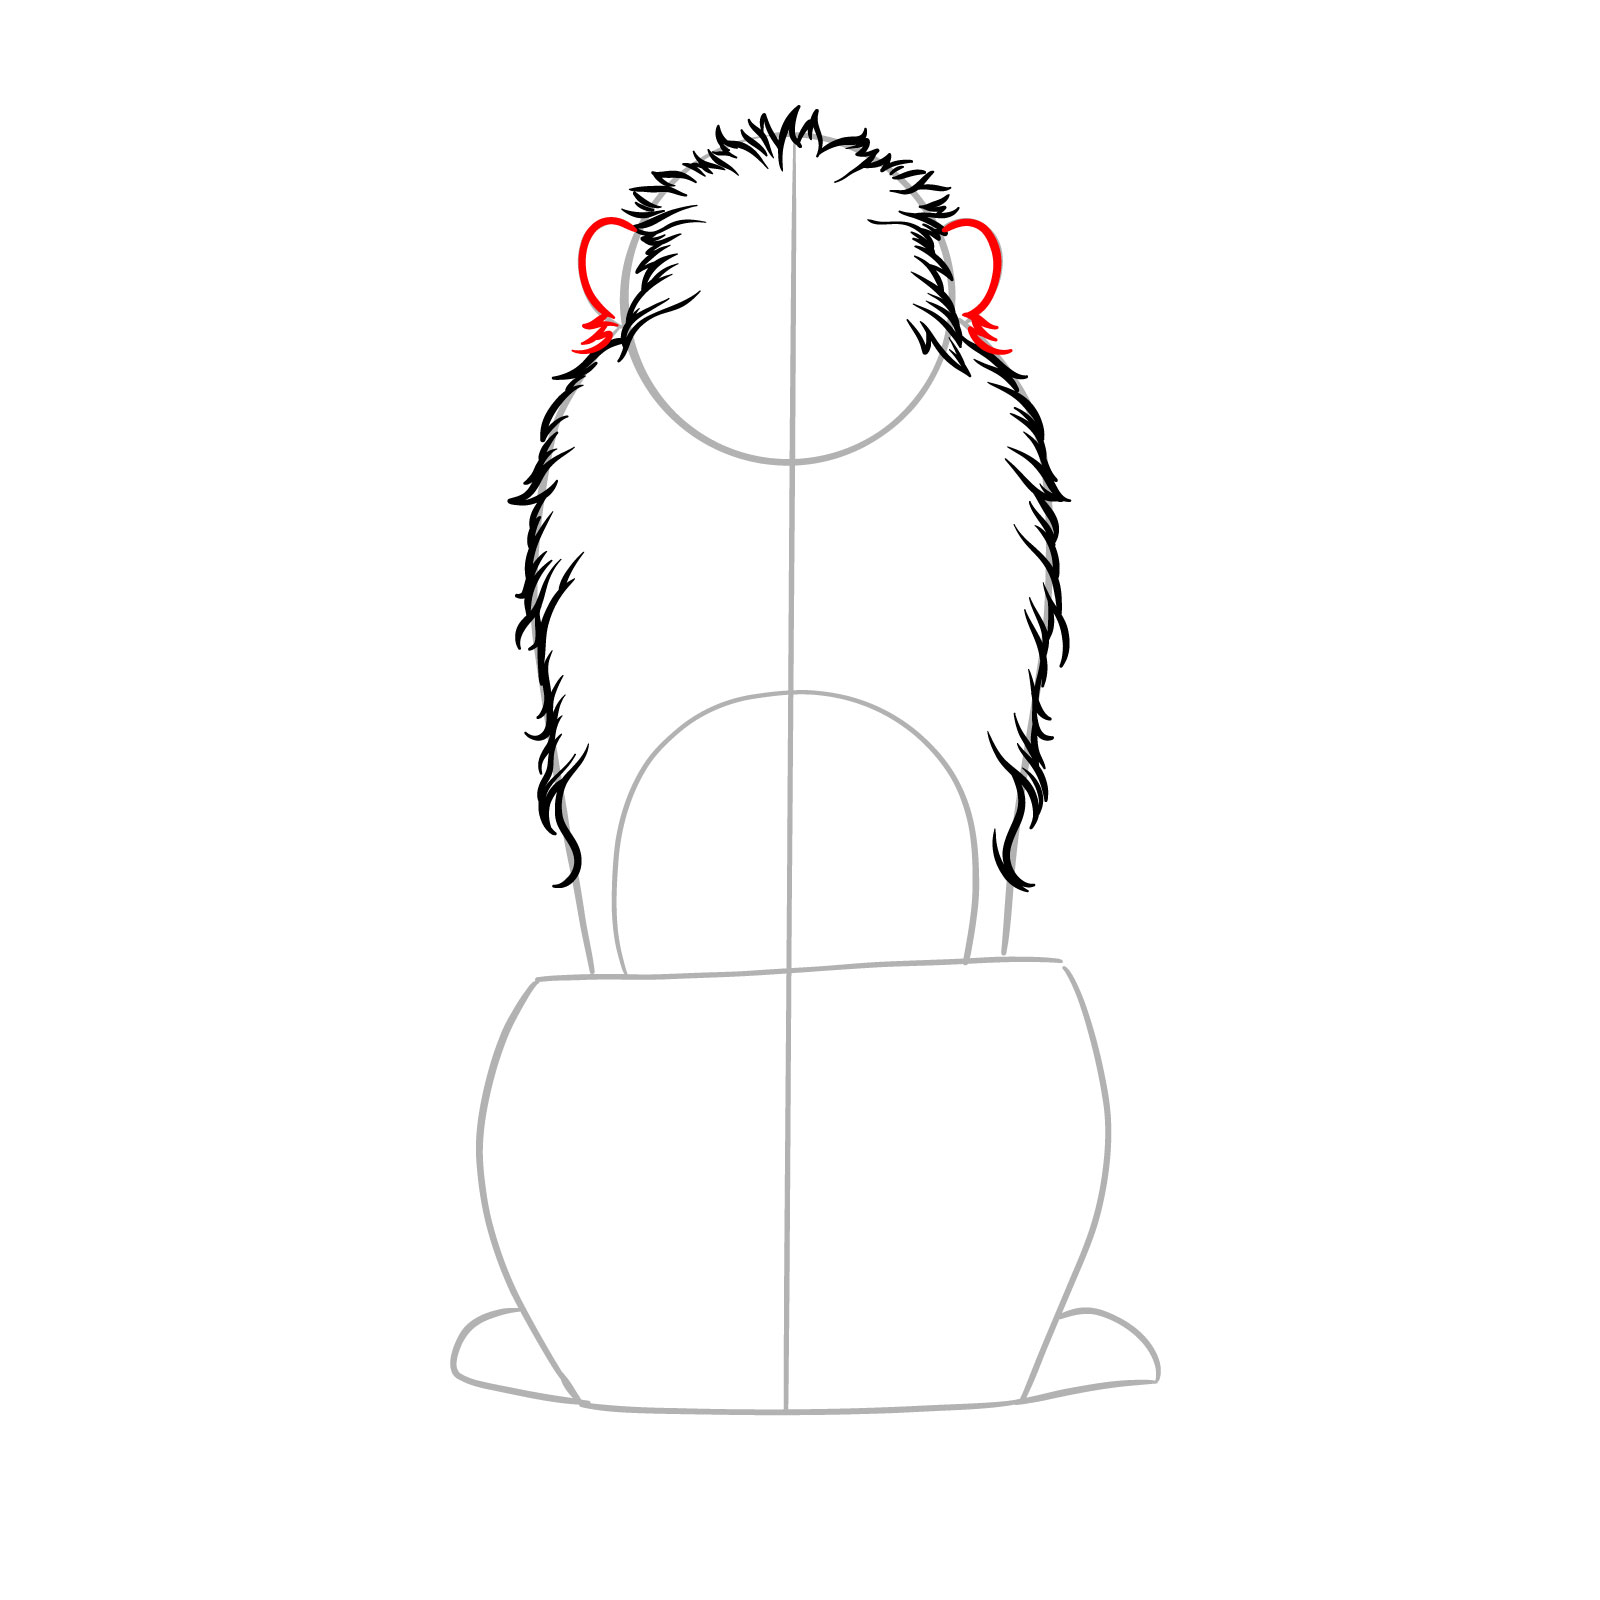 Step 5 in drawing a sitting lion from the back view, outlining ears with fur details